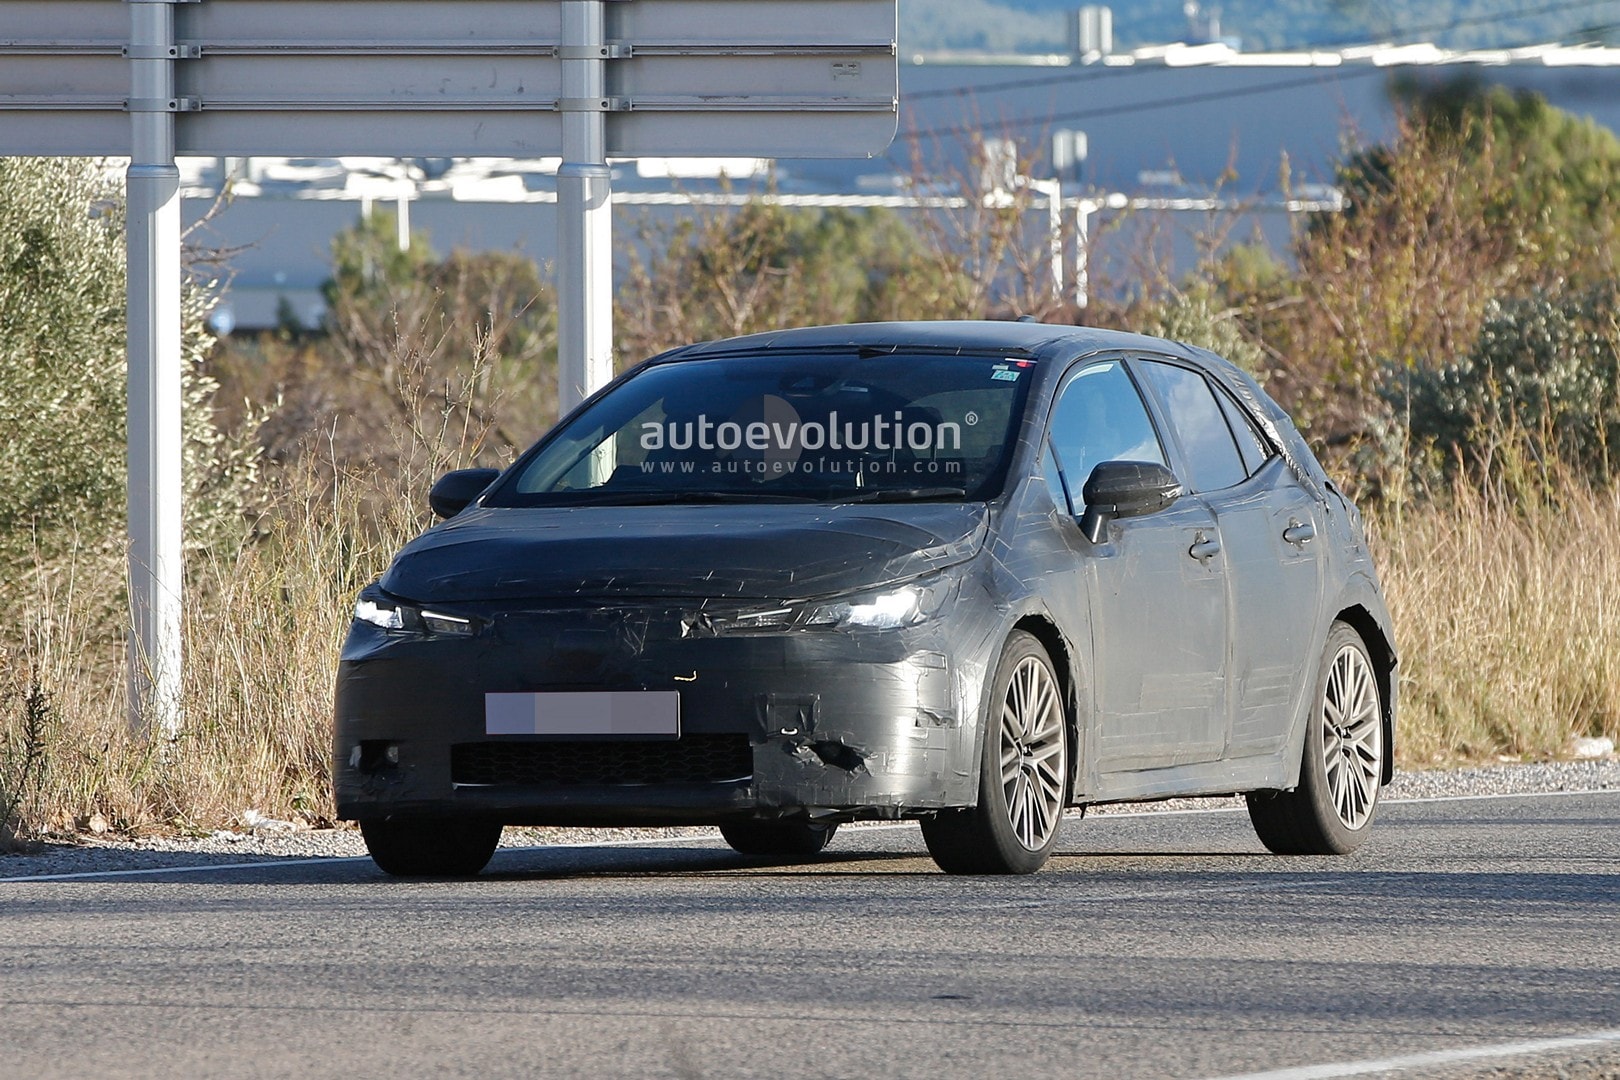 2019-toyota-auris-spied-with-production-body-122236_1.jpg